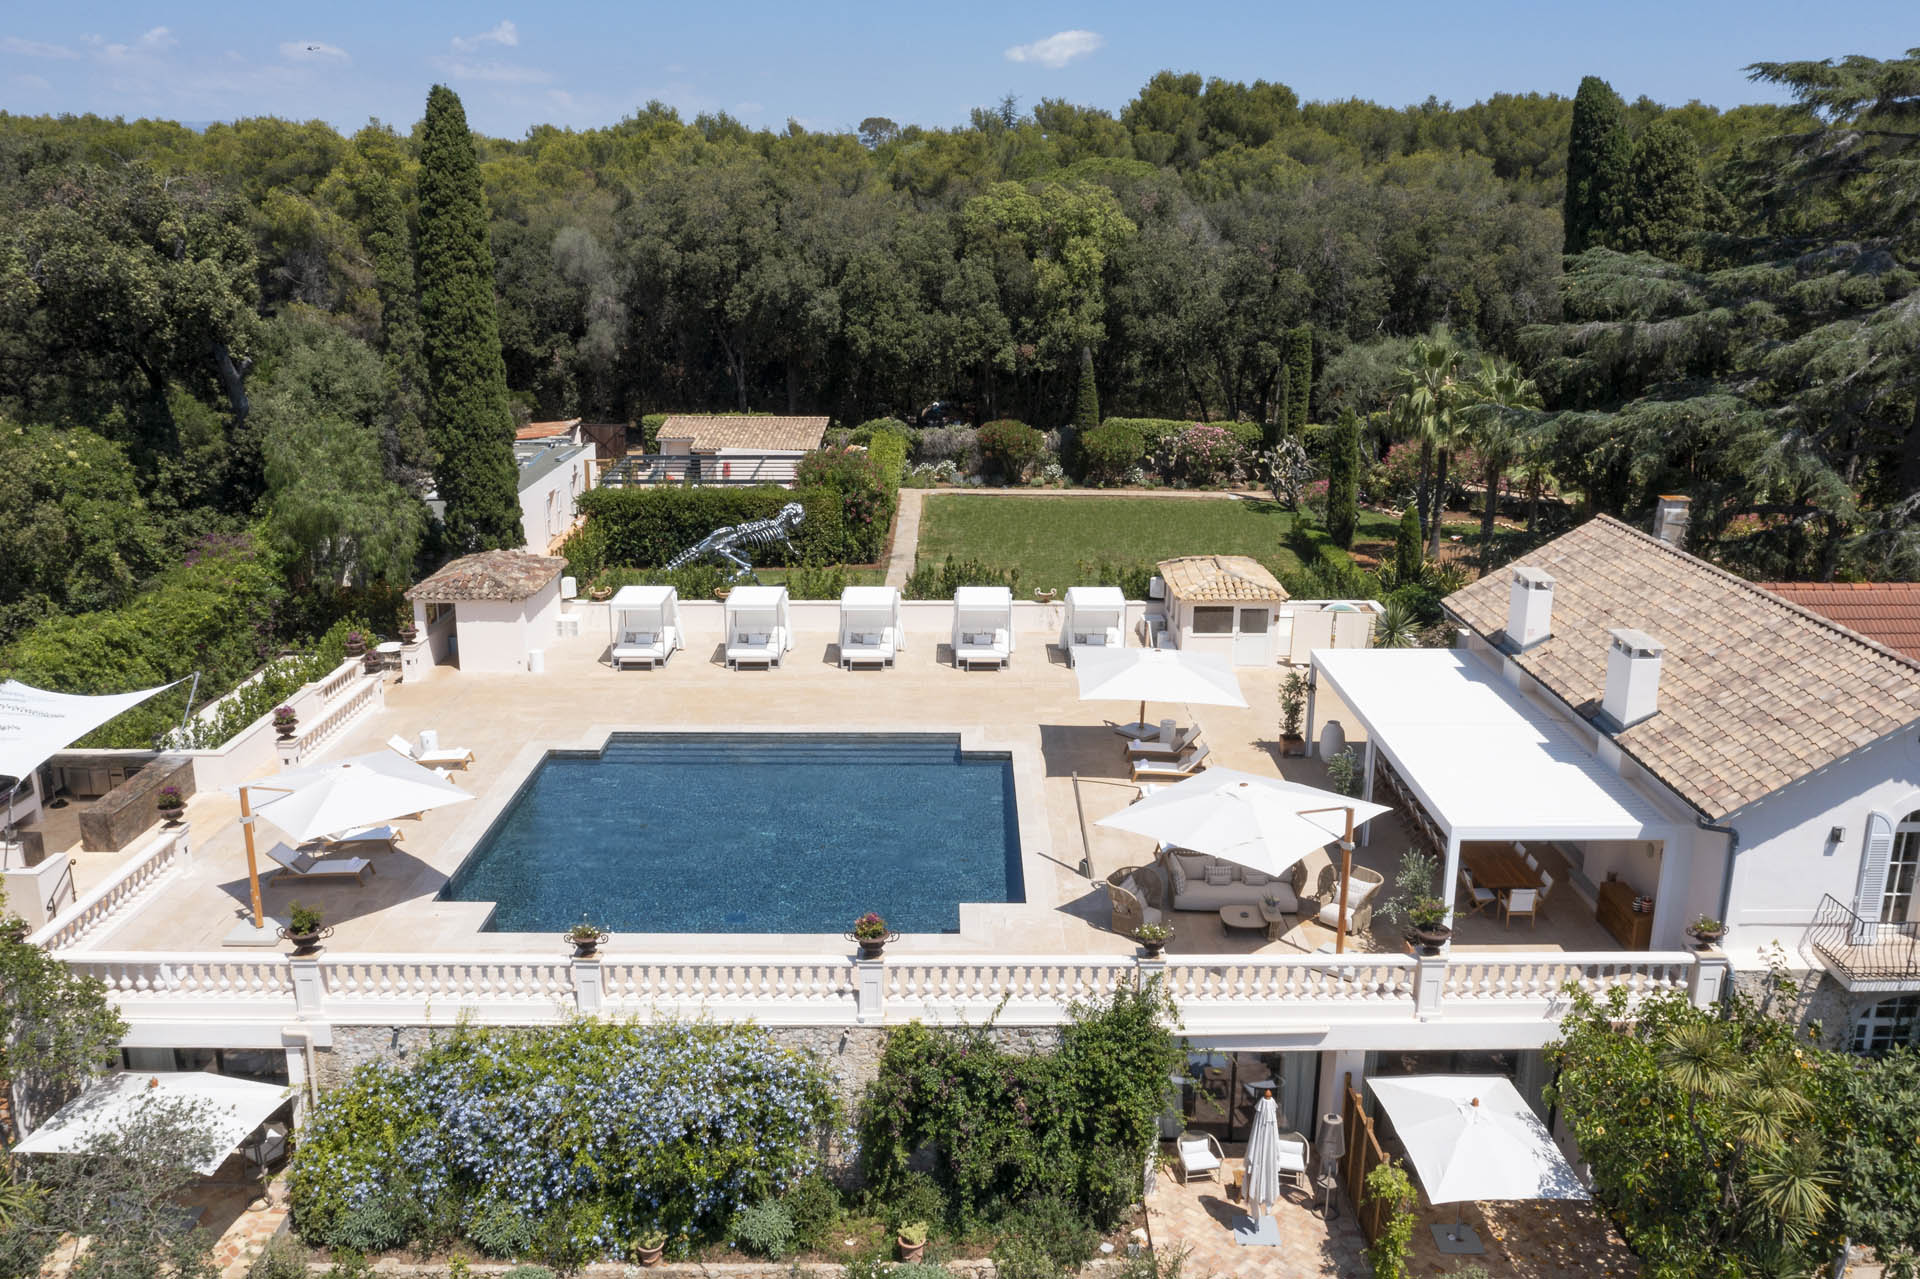 This private residence in the French Riviera is for design lovers with ...